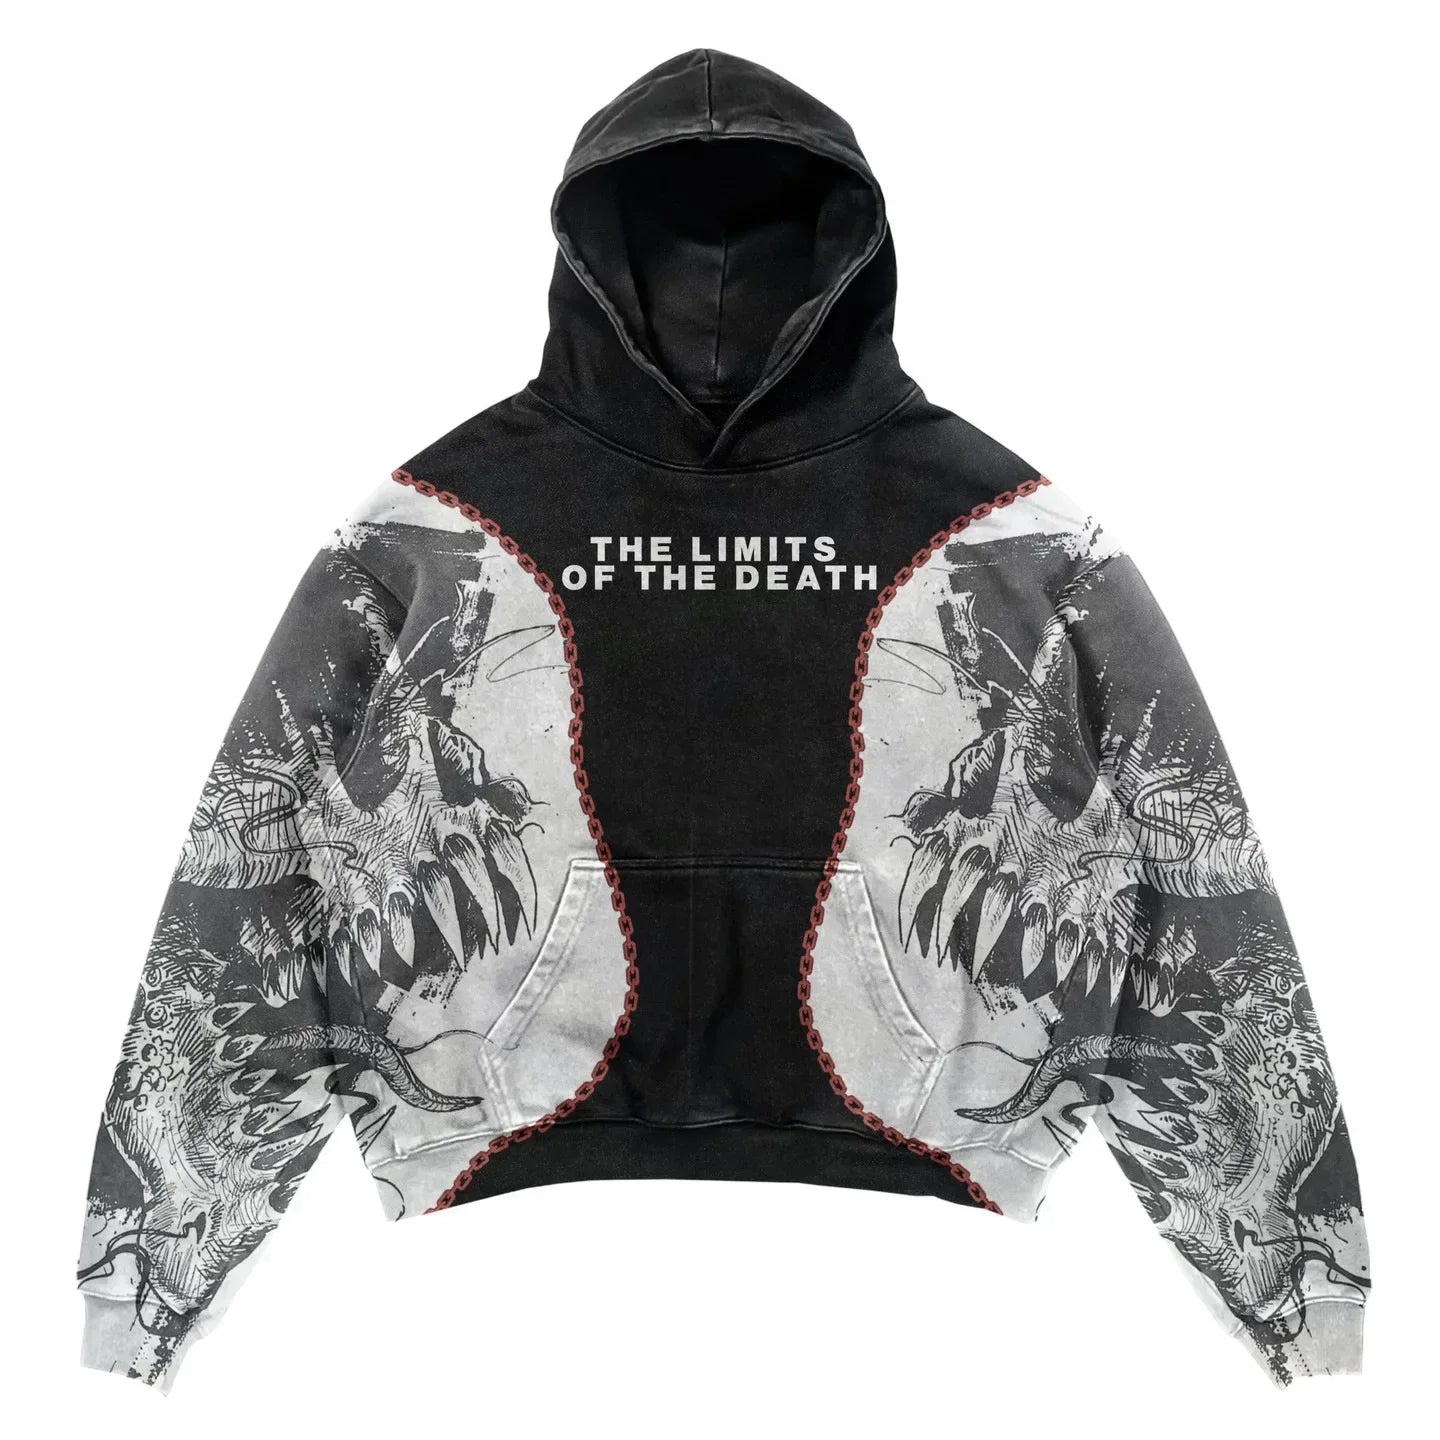 A black Maramalive™ Explosions Printed Skull Y2K Retro Hooded Sweater Coat Street Style Gothic Casual Fashion Hooded Sweater Men's Female featuring the phrase "THE LIMITS OF THE DEATH" on the chest, with a punk style graphic design of skeletal creatures and intricate patterns covering the sleeves and torso, perfect for all four seasons.